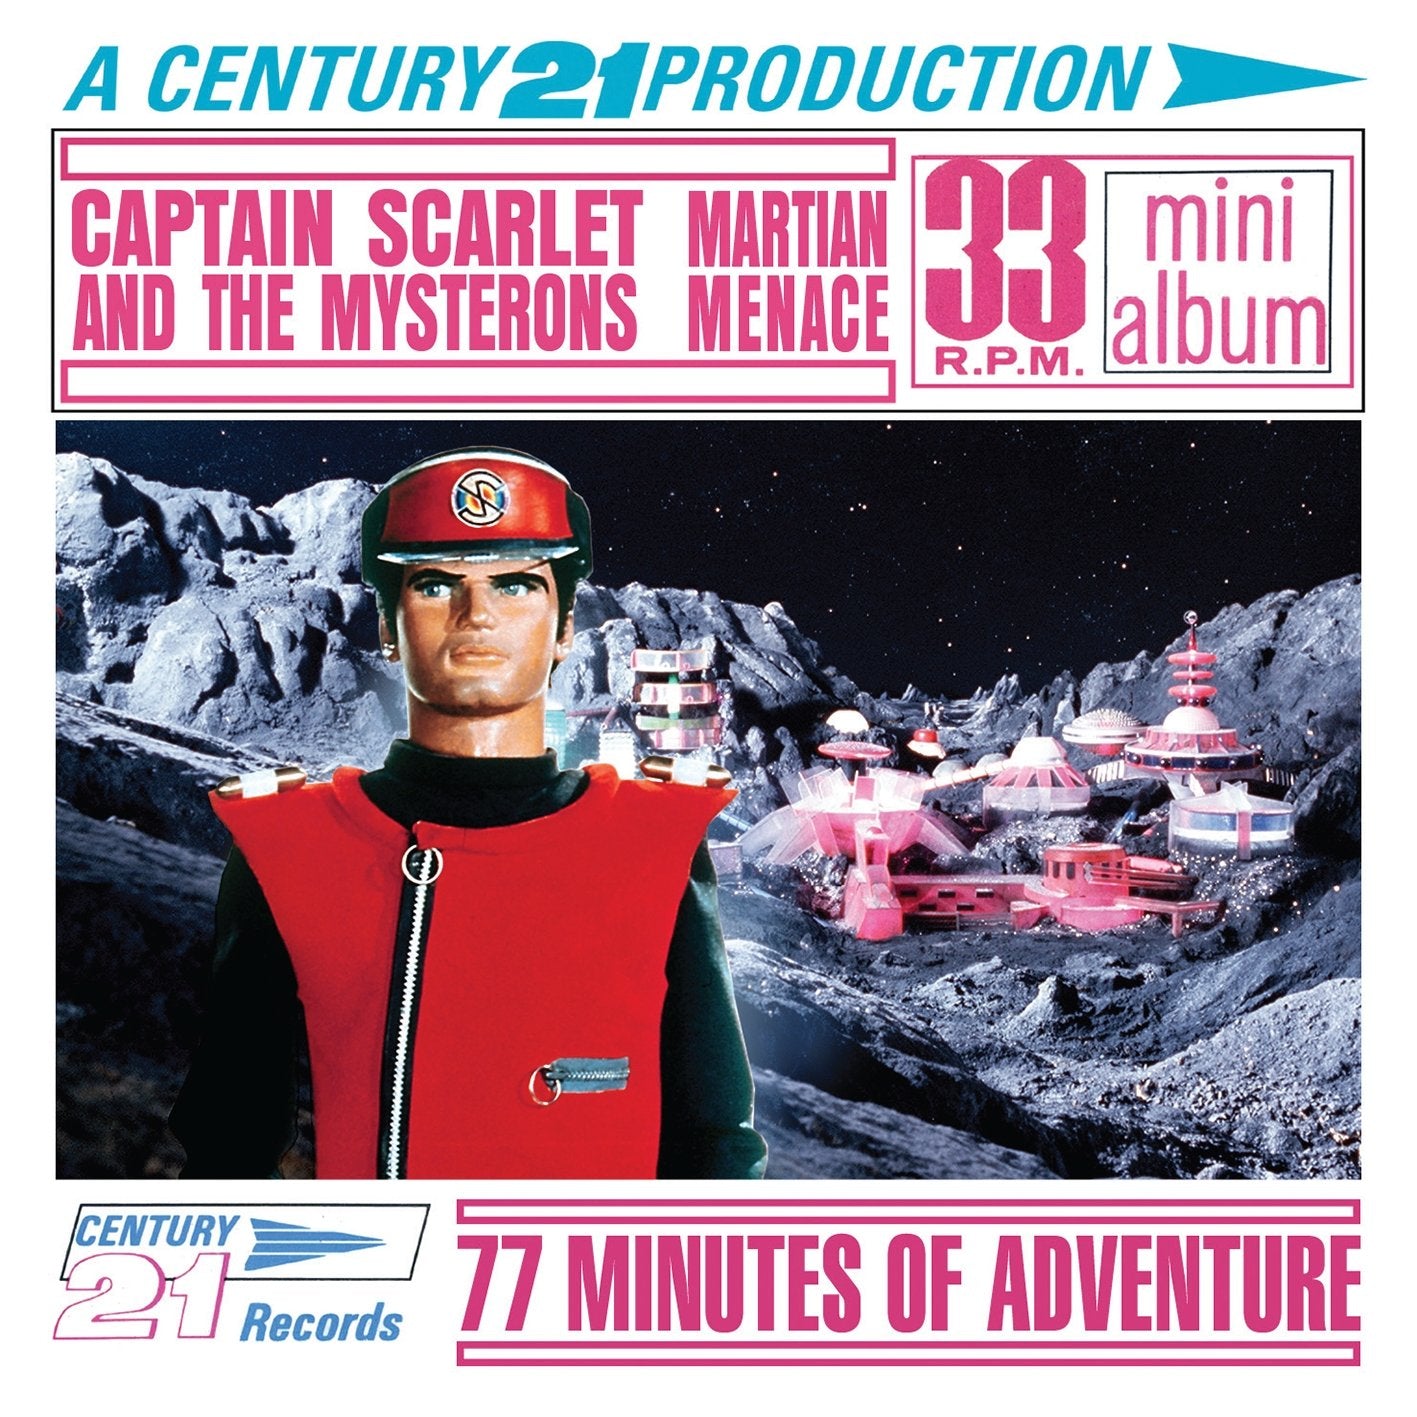 Captain Scarlet and the Mysterons: Martian Menace: Limited Edition (CD) - The Ger